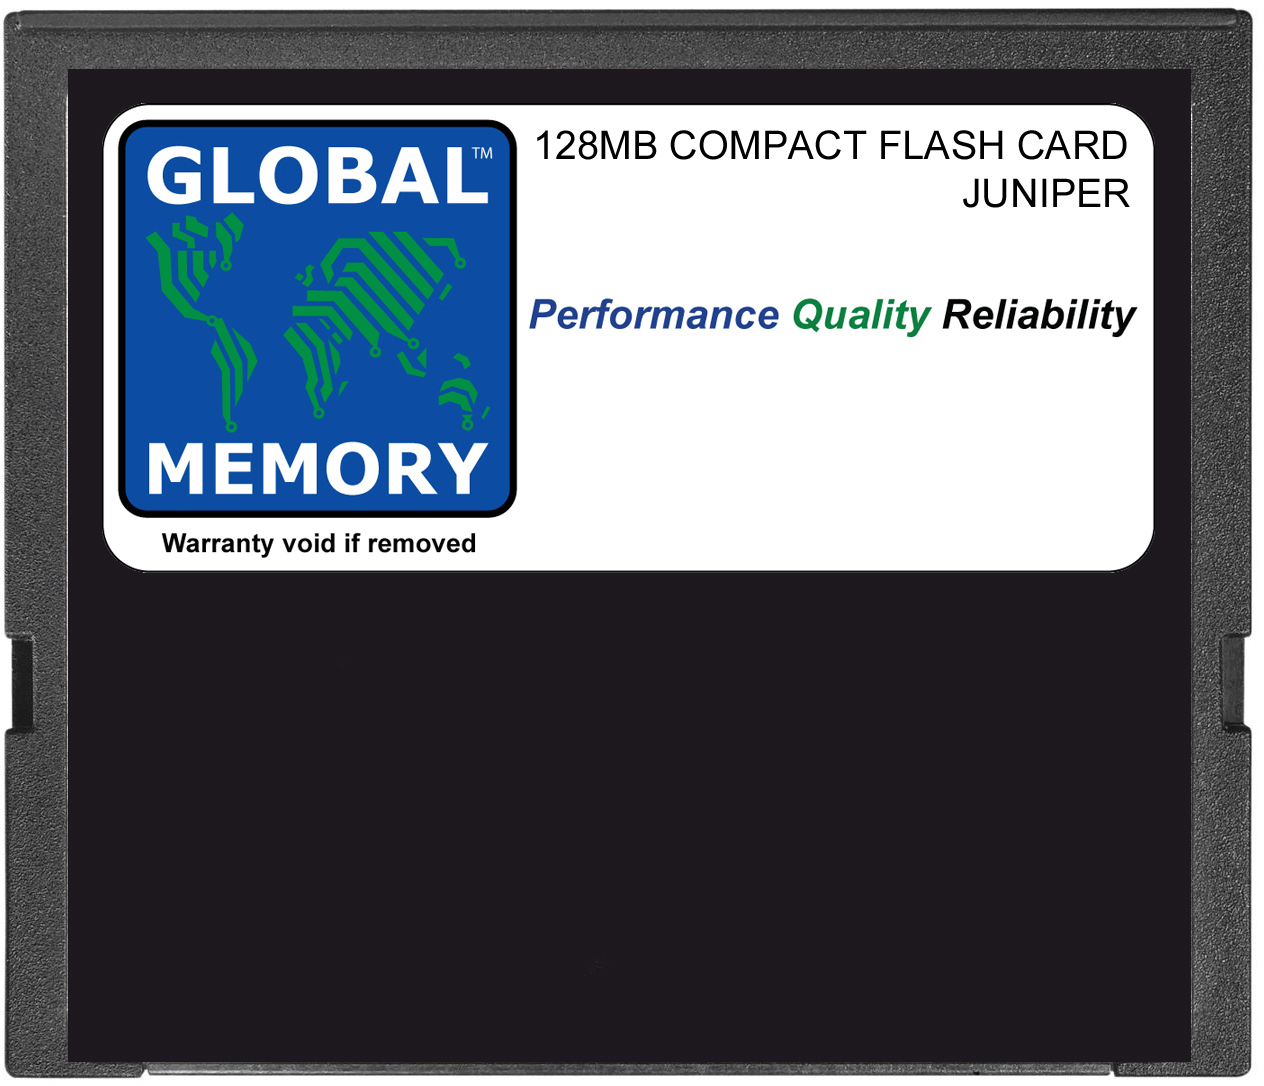 128MB COMPACT FLASH CARD MEMORY FOR JUNIPER J2300 / J4300 / J6300 SERIES ROUTERS (JX-CF-128M-S) - Click Image to Close